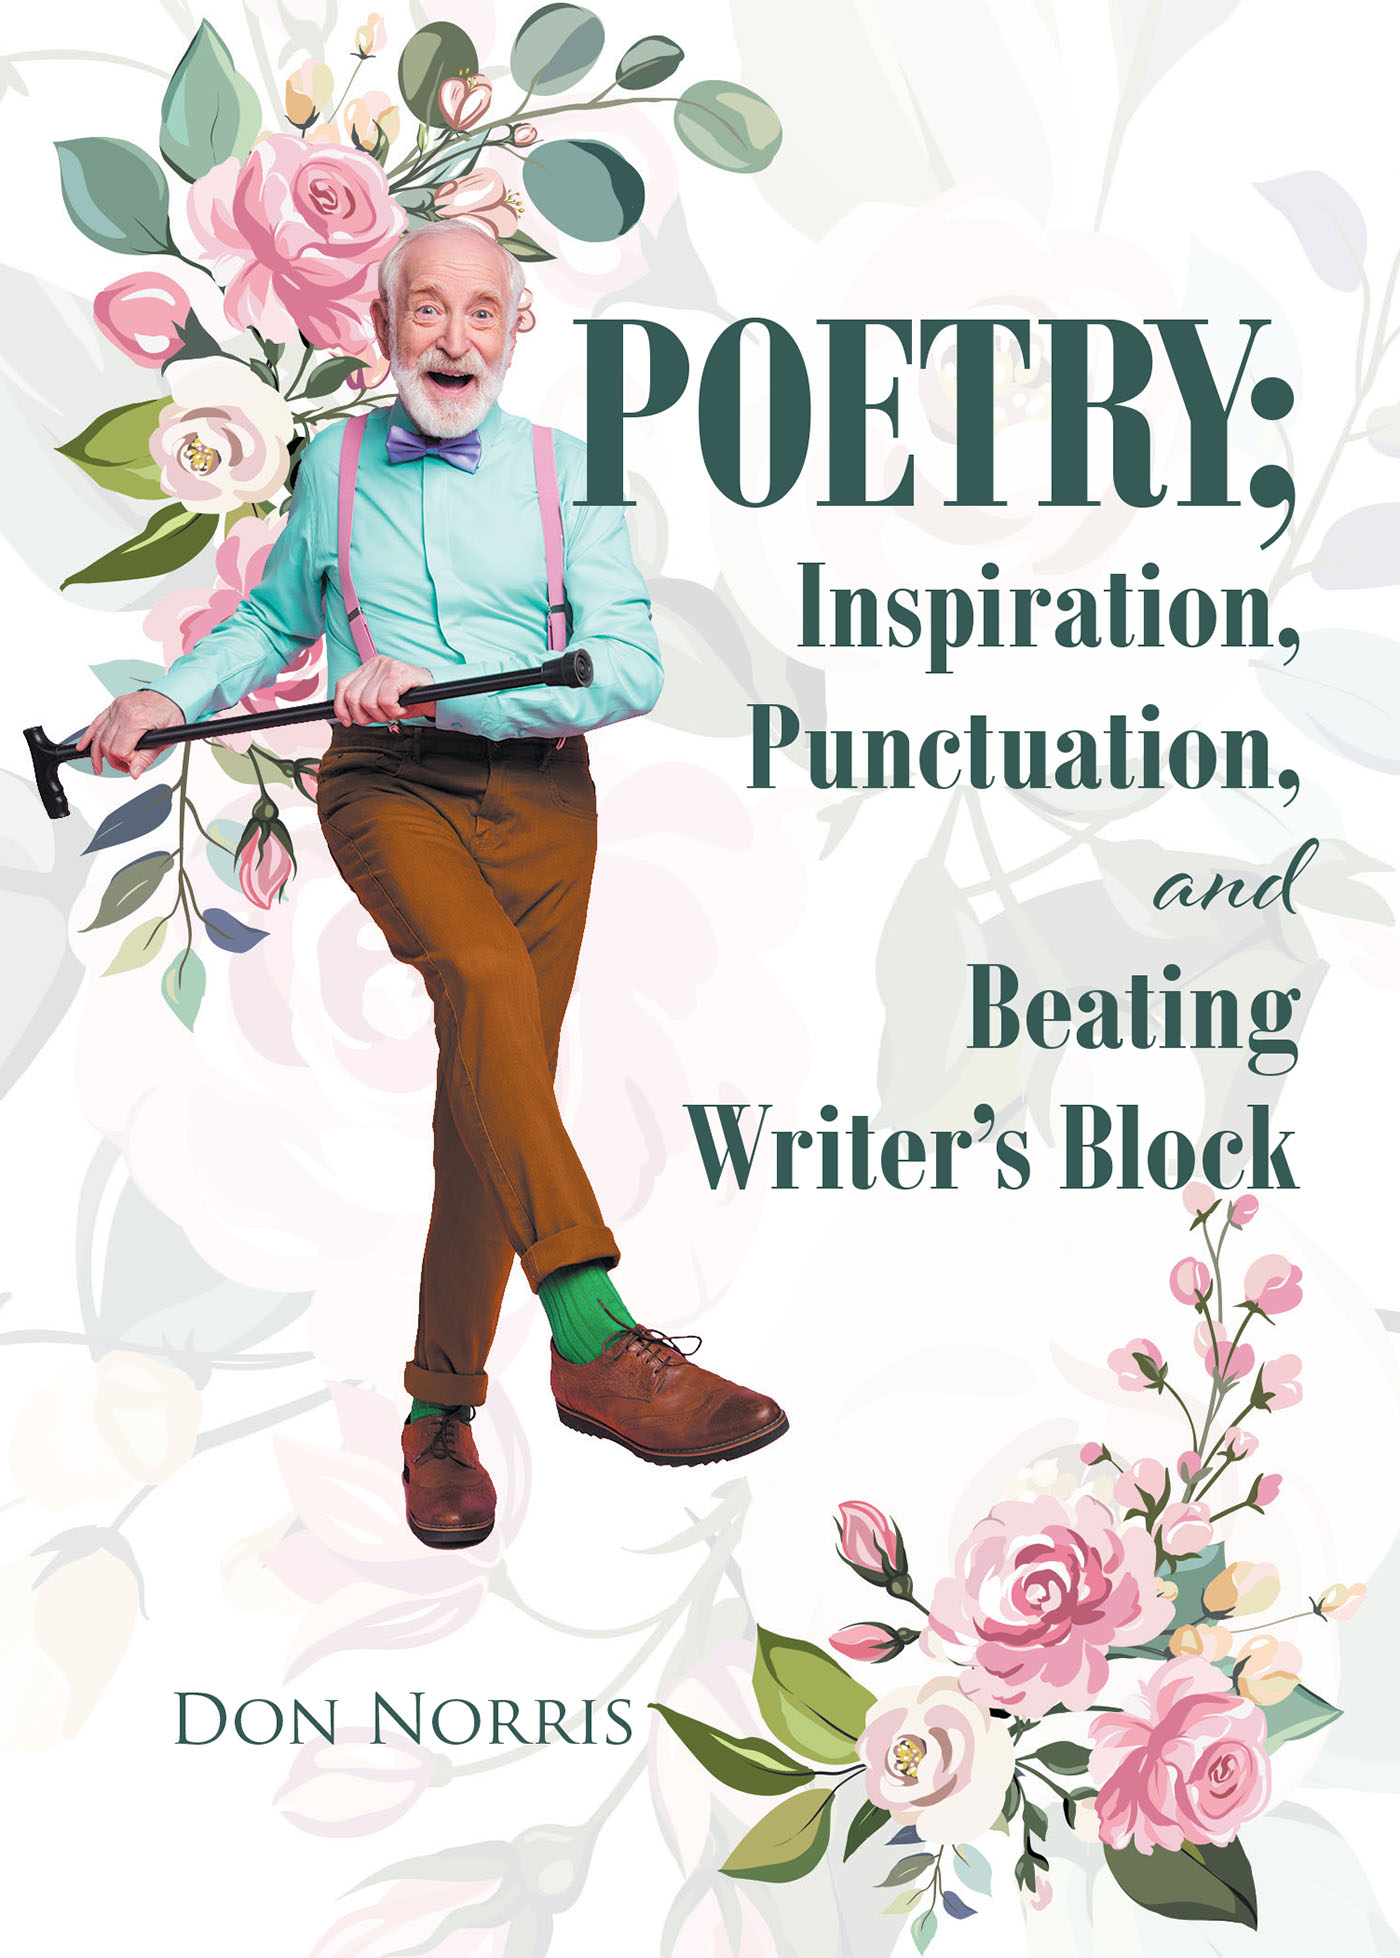 Author Don Norris’s New Book, "Poetry; Inspiration, Punctuation, and Beating Writer’s Block," is a Collection of Poems and Stories Revealing How to Beat Writer's Block